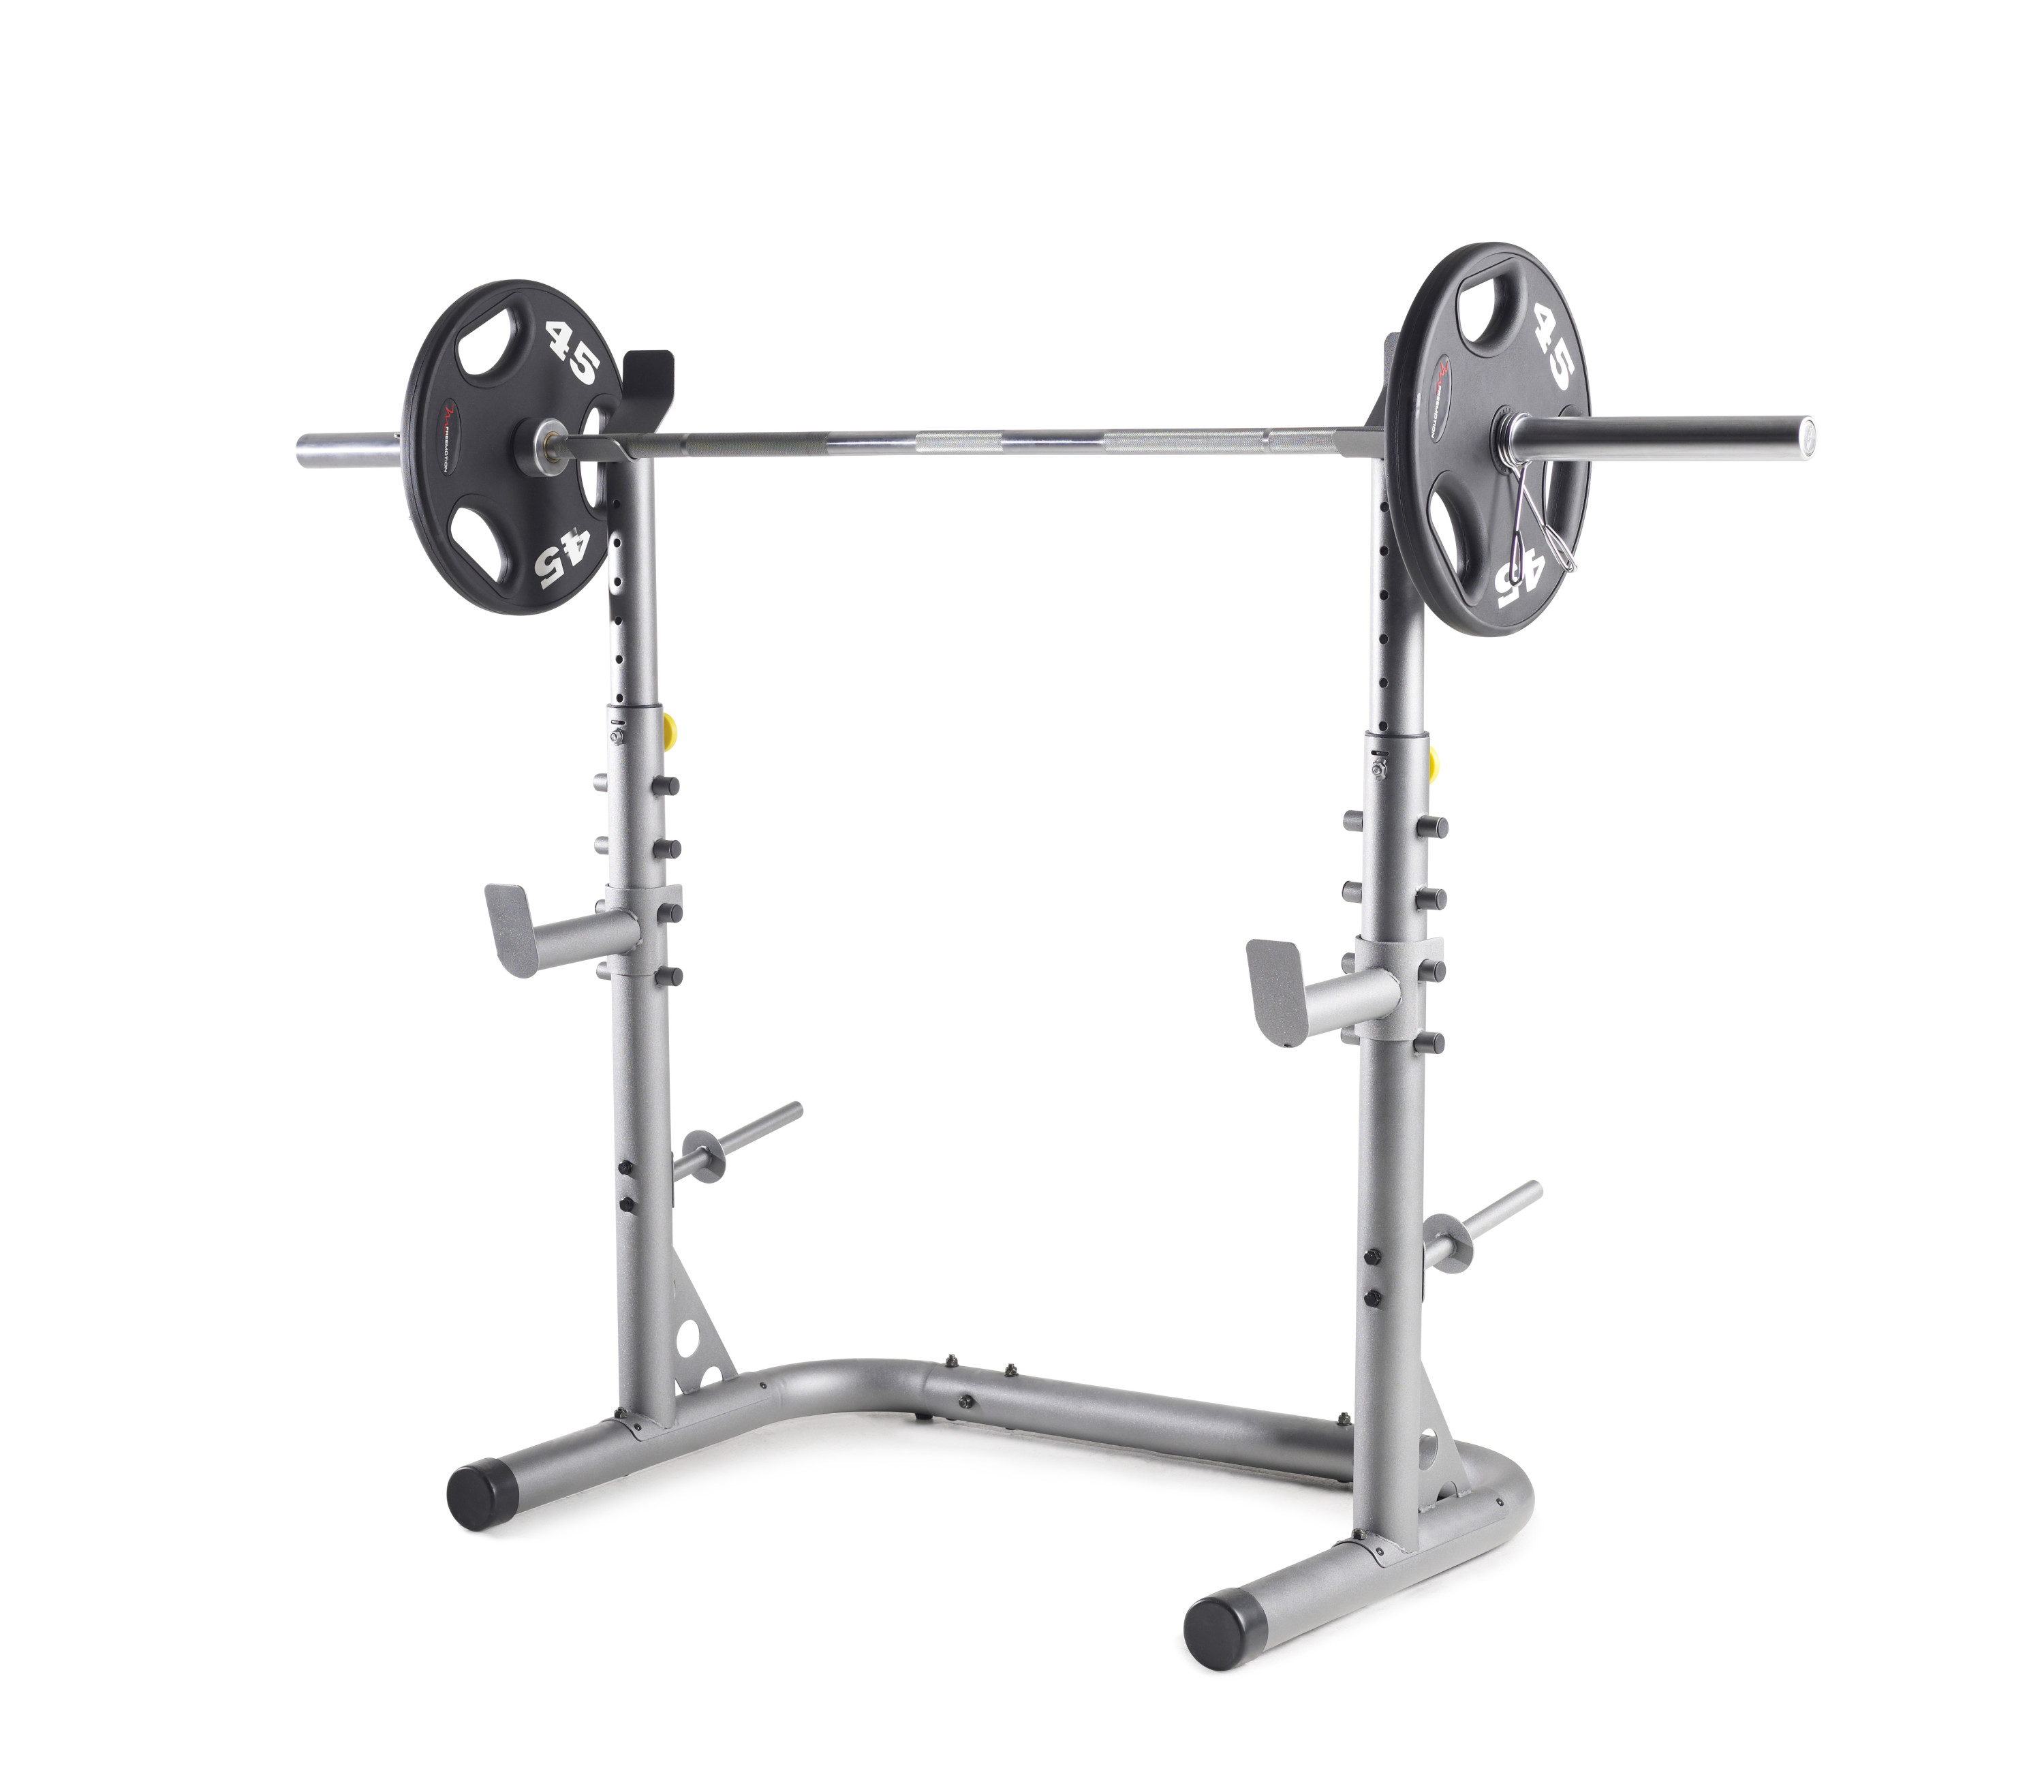 Weider XRS 20 Olympic Squat Rack with 300 Lb. Weight Limit - image 1 of 11